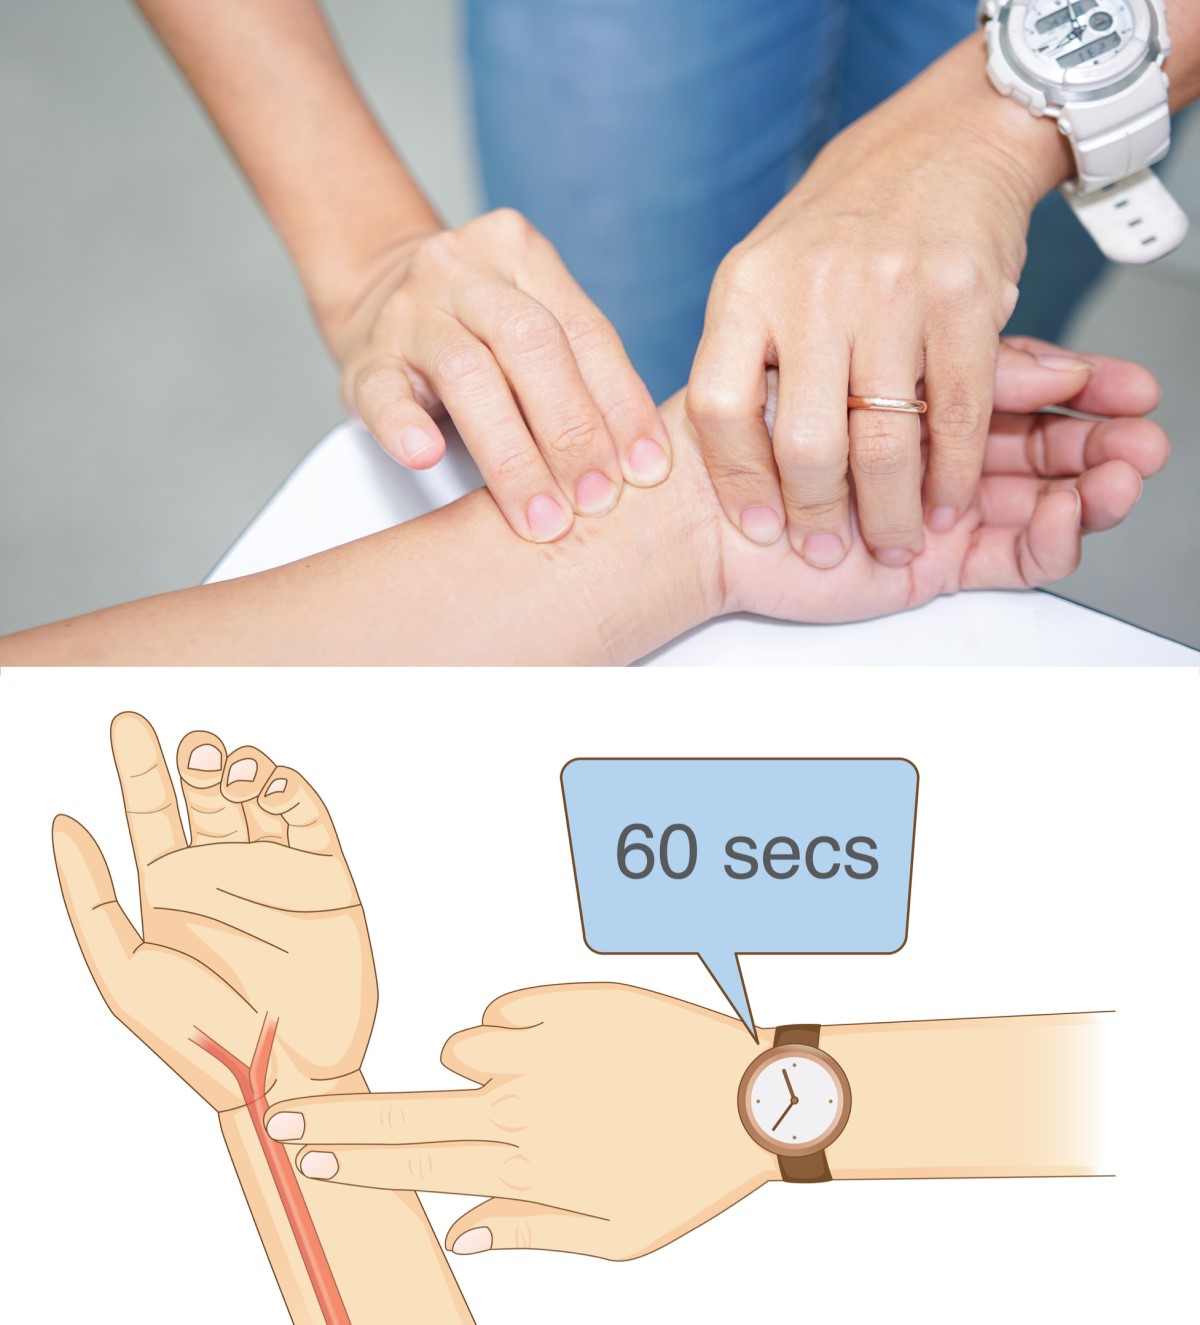 Measurement - palpation of pulse, pulse on the wrist with three fingers on the inner and thumb side of the wrist.